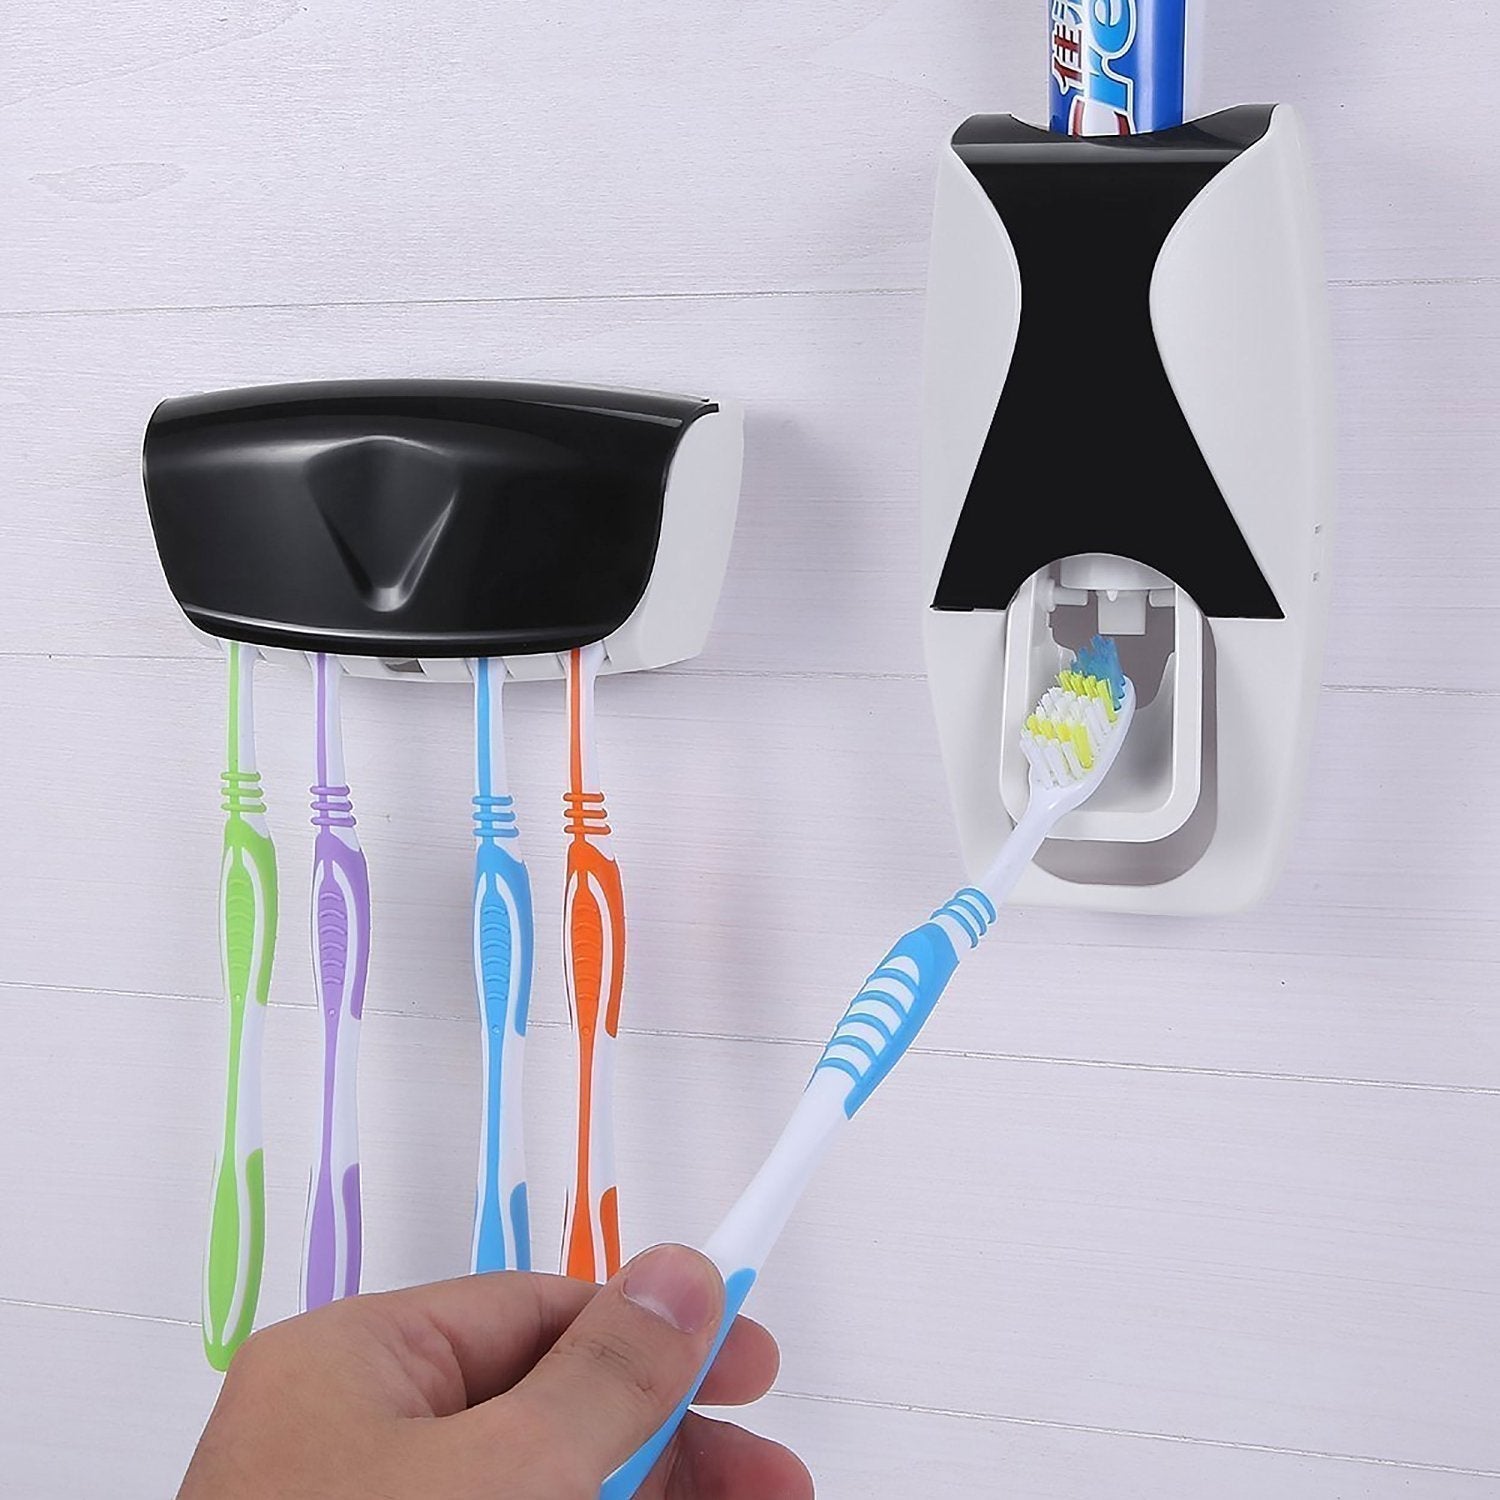 200 Toothpaste Dispenser & Tooth Brush with Toothbrush Dukandaily